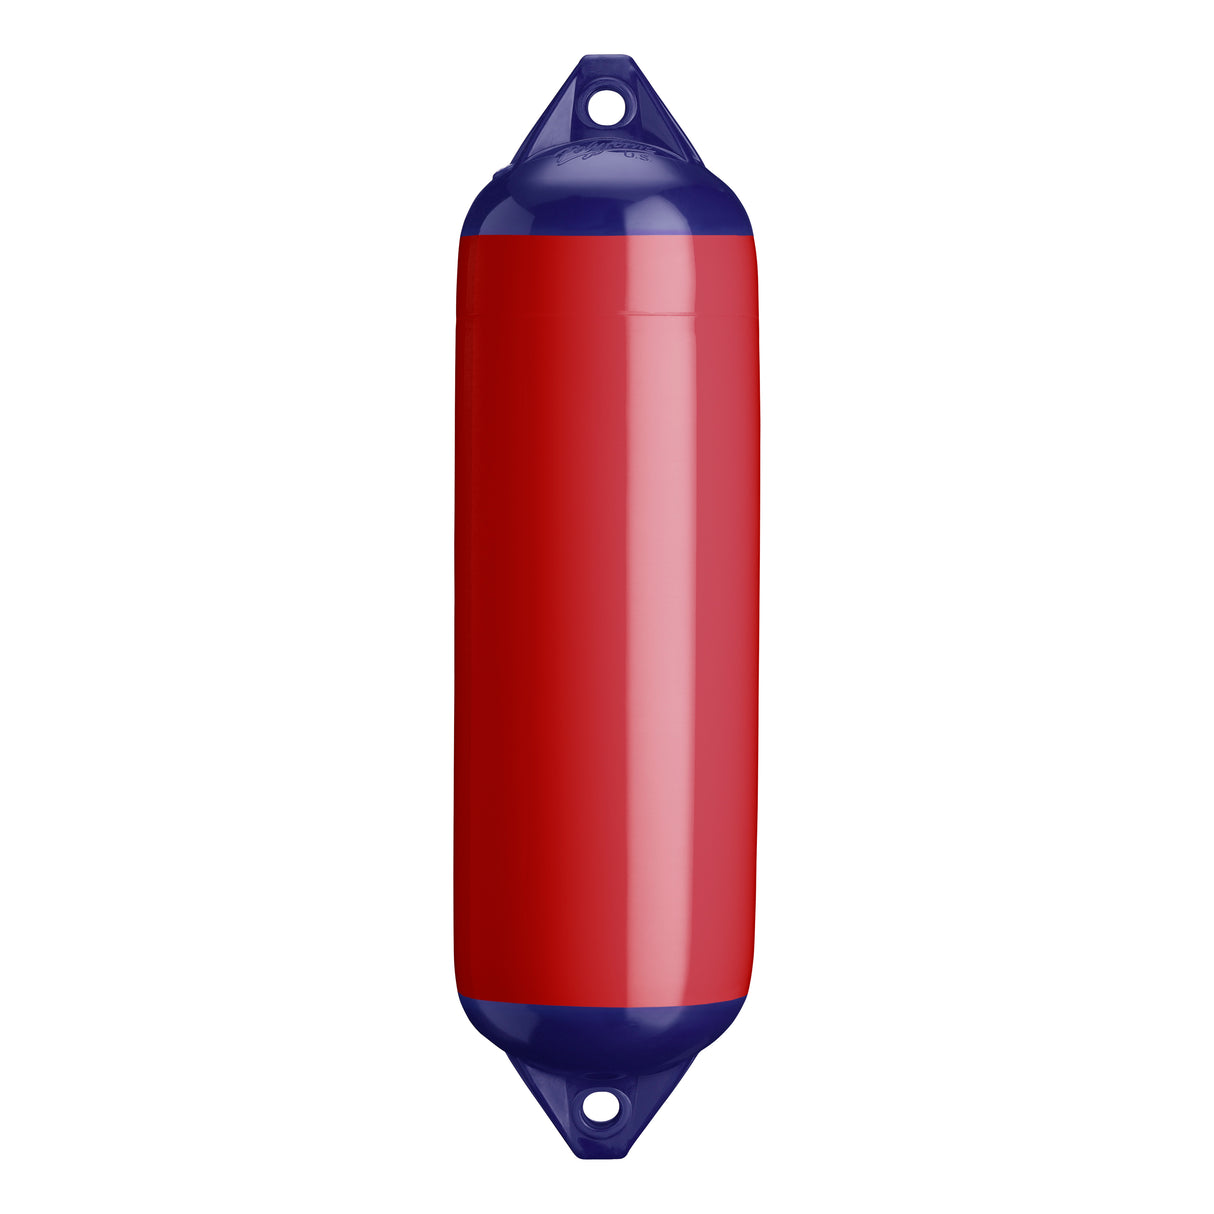 Classic Red boat fender with Navy-Top, Polyform F-3 